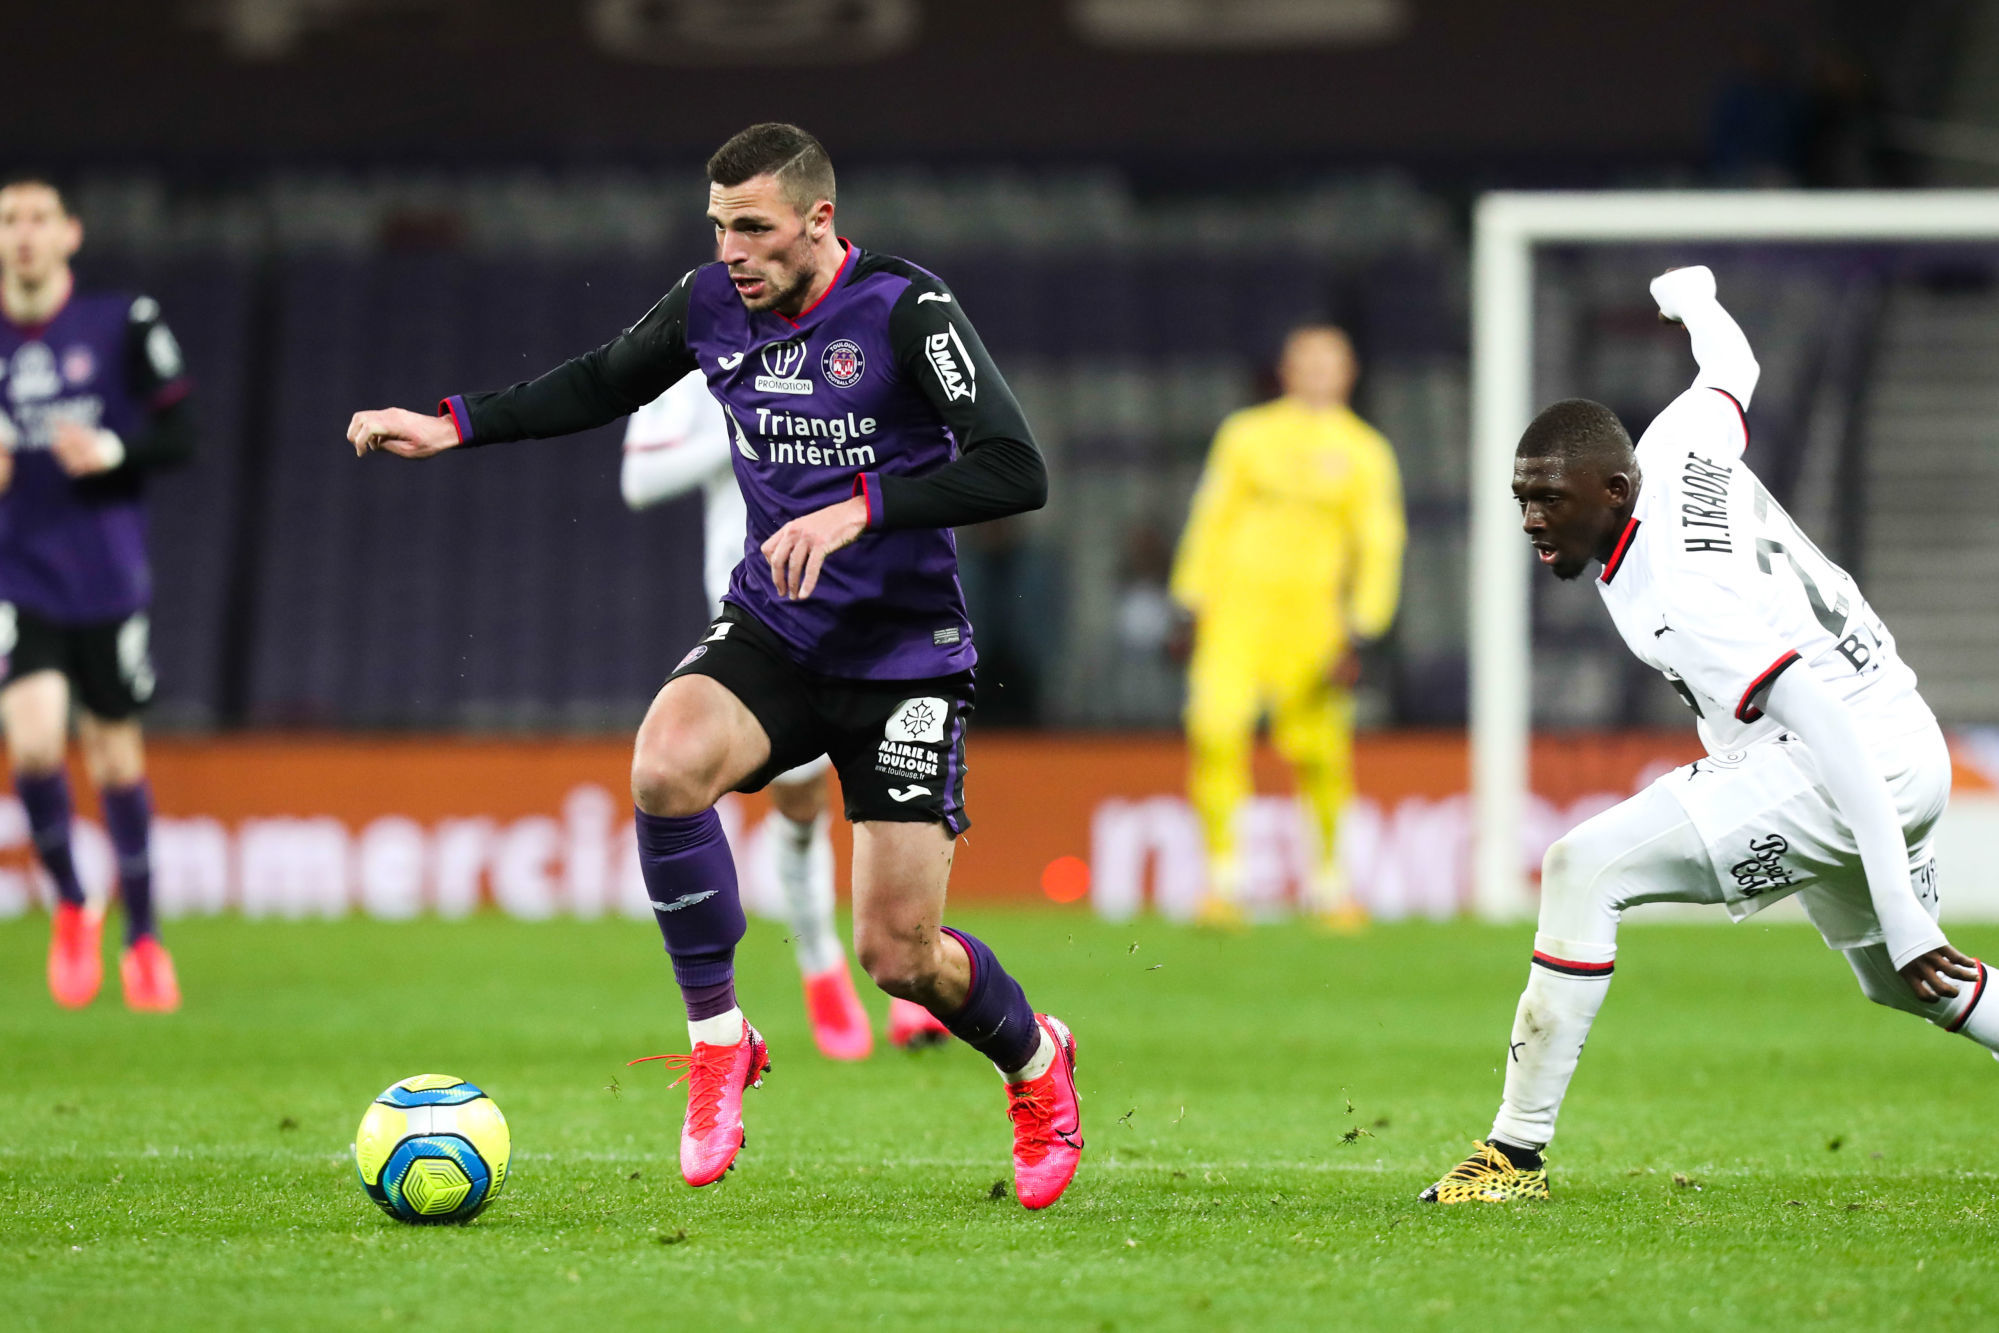 Quentin BOISGARD of Toulouse during the Ligue 1 match between Toulouse FC and Rennes at Stadium Municipal on February 29, 2020 in Toulouse, France. (Photo by Manuel Blondeau/Icon Sport) - Quentin BOISGARD - Stadium Municipal - Toulouse (France)